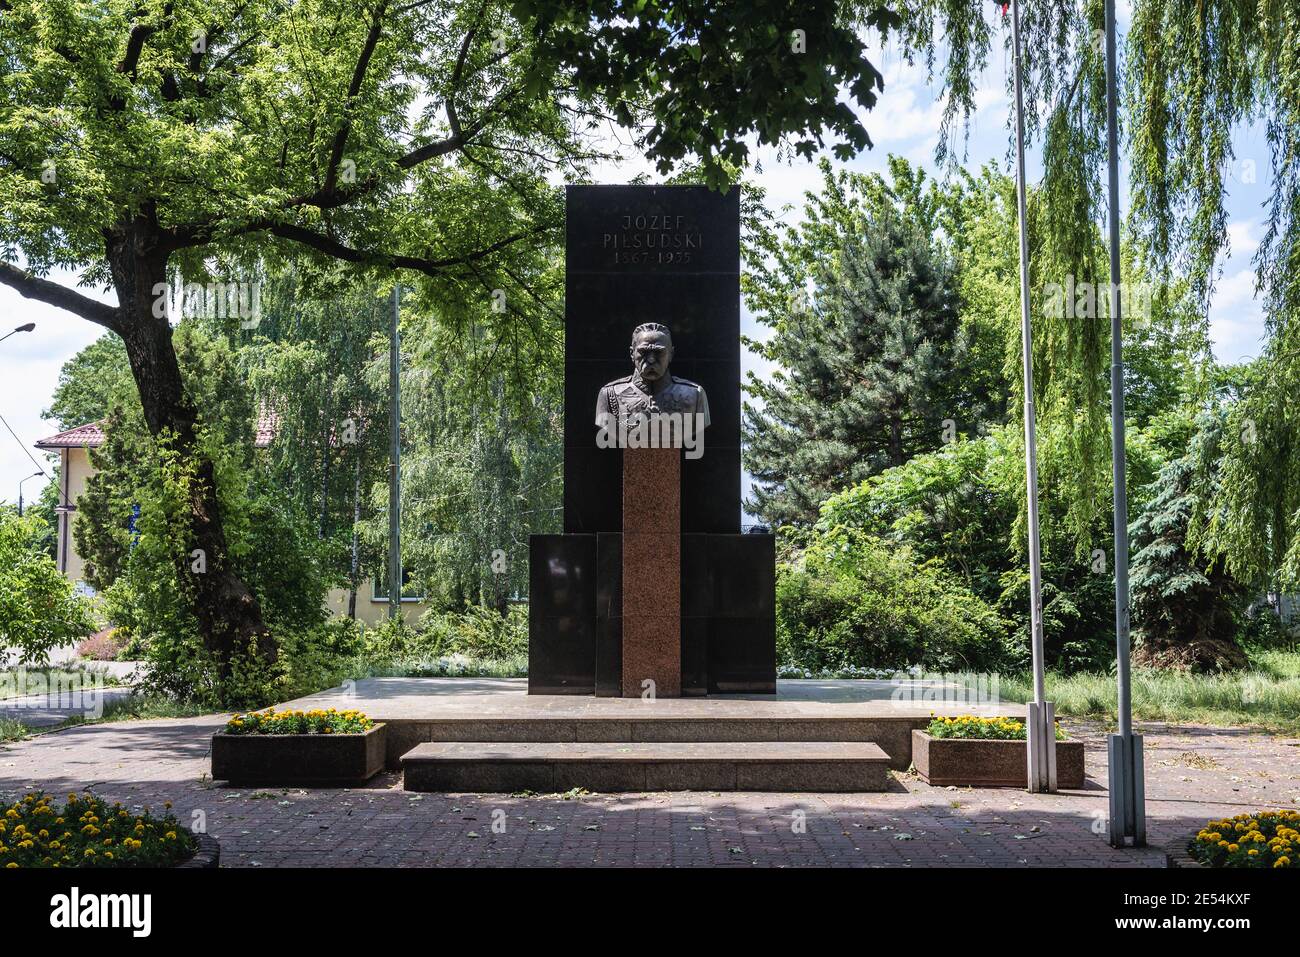 Jozef Pilsudski monument in Wolomin, main town of Wolomin County situated in the Masovian Voivodship near Warsaw, Poland Stock Photo